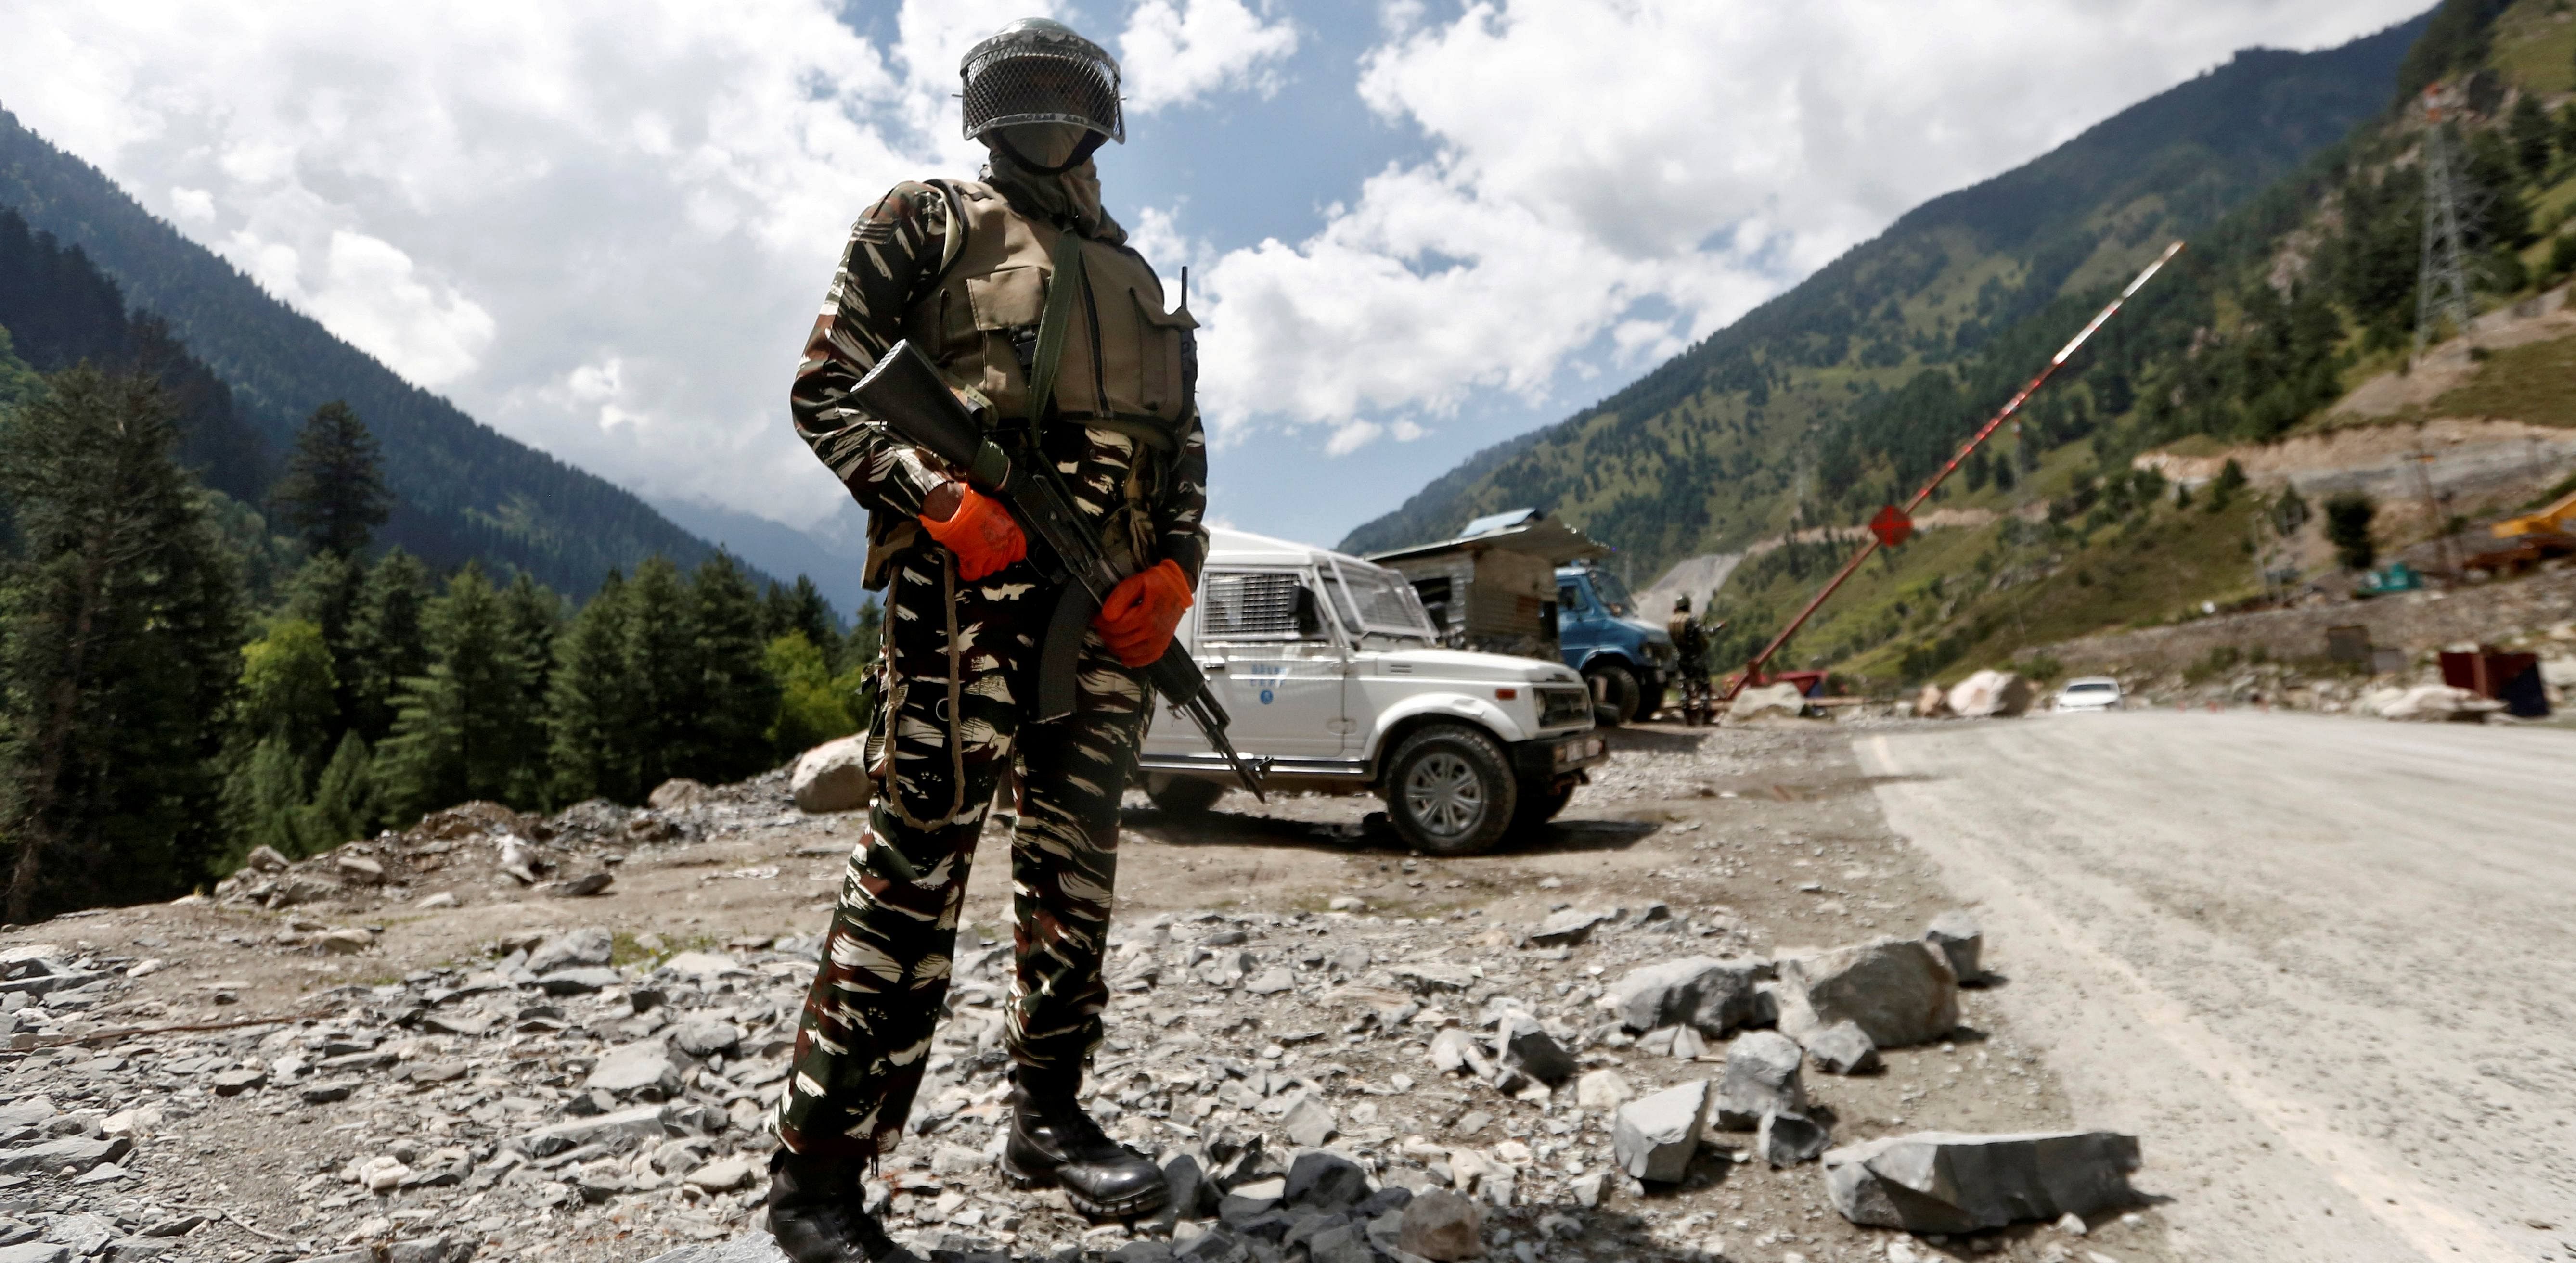 Despite the ongoing standoff between Indian and Chinese armies on its border, Union Territory (UT) of Ladakh has formulated a vision document for the next 30 years to provide good governance and ensure holistic development of the cold desert region. Representative image. Credit: Reuters